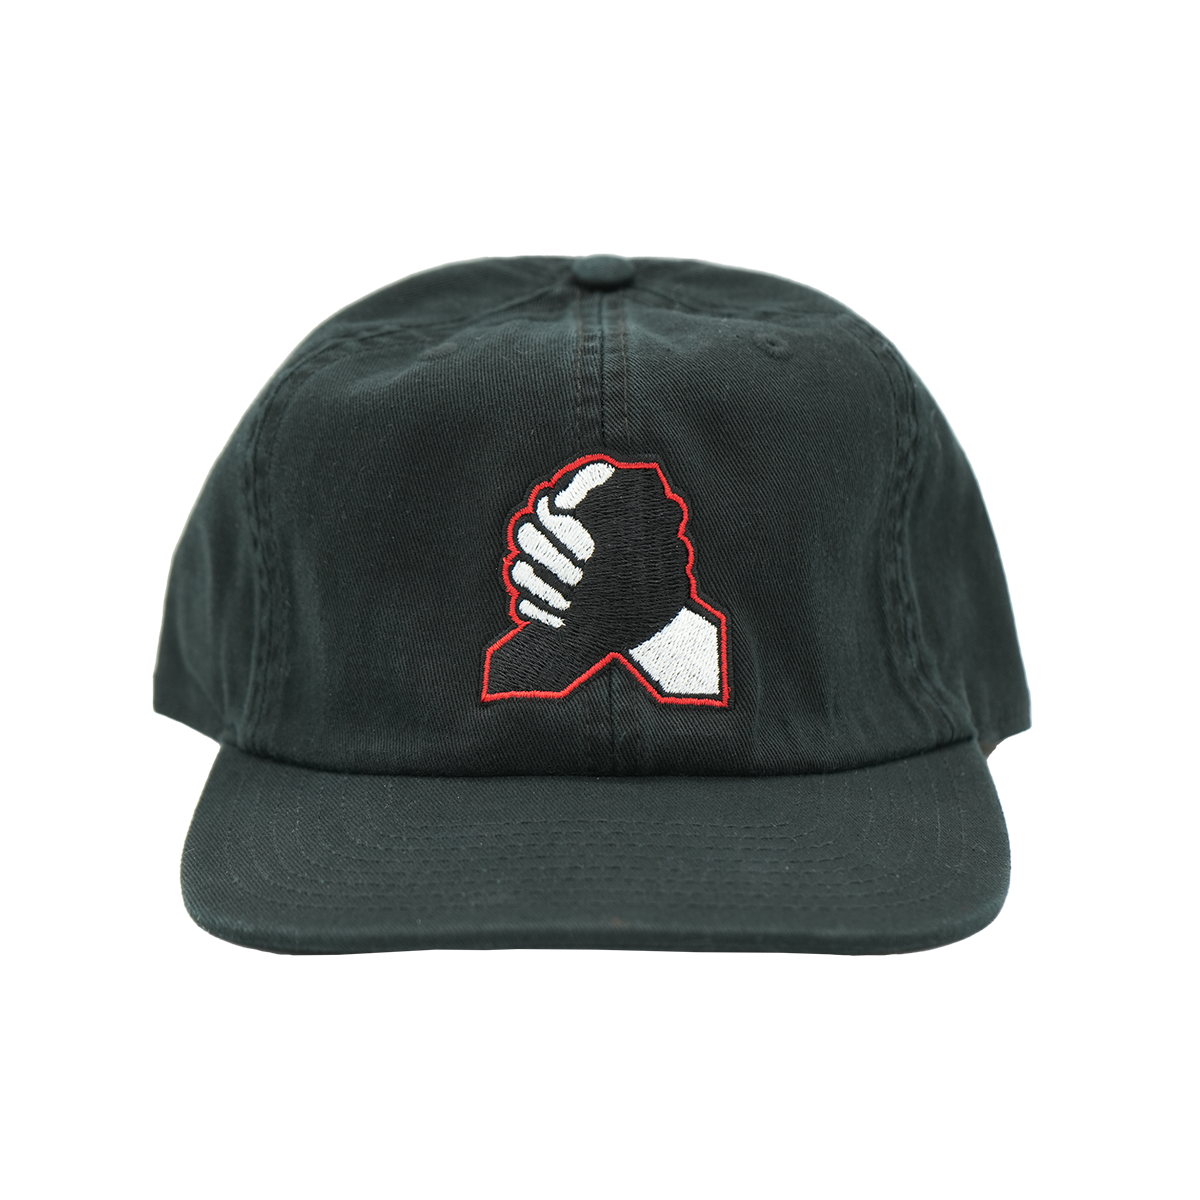 United Hands Hat- Assorted Colors